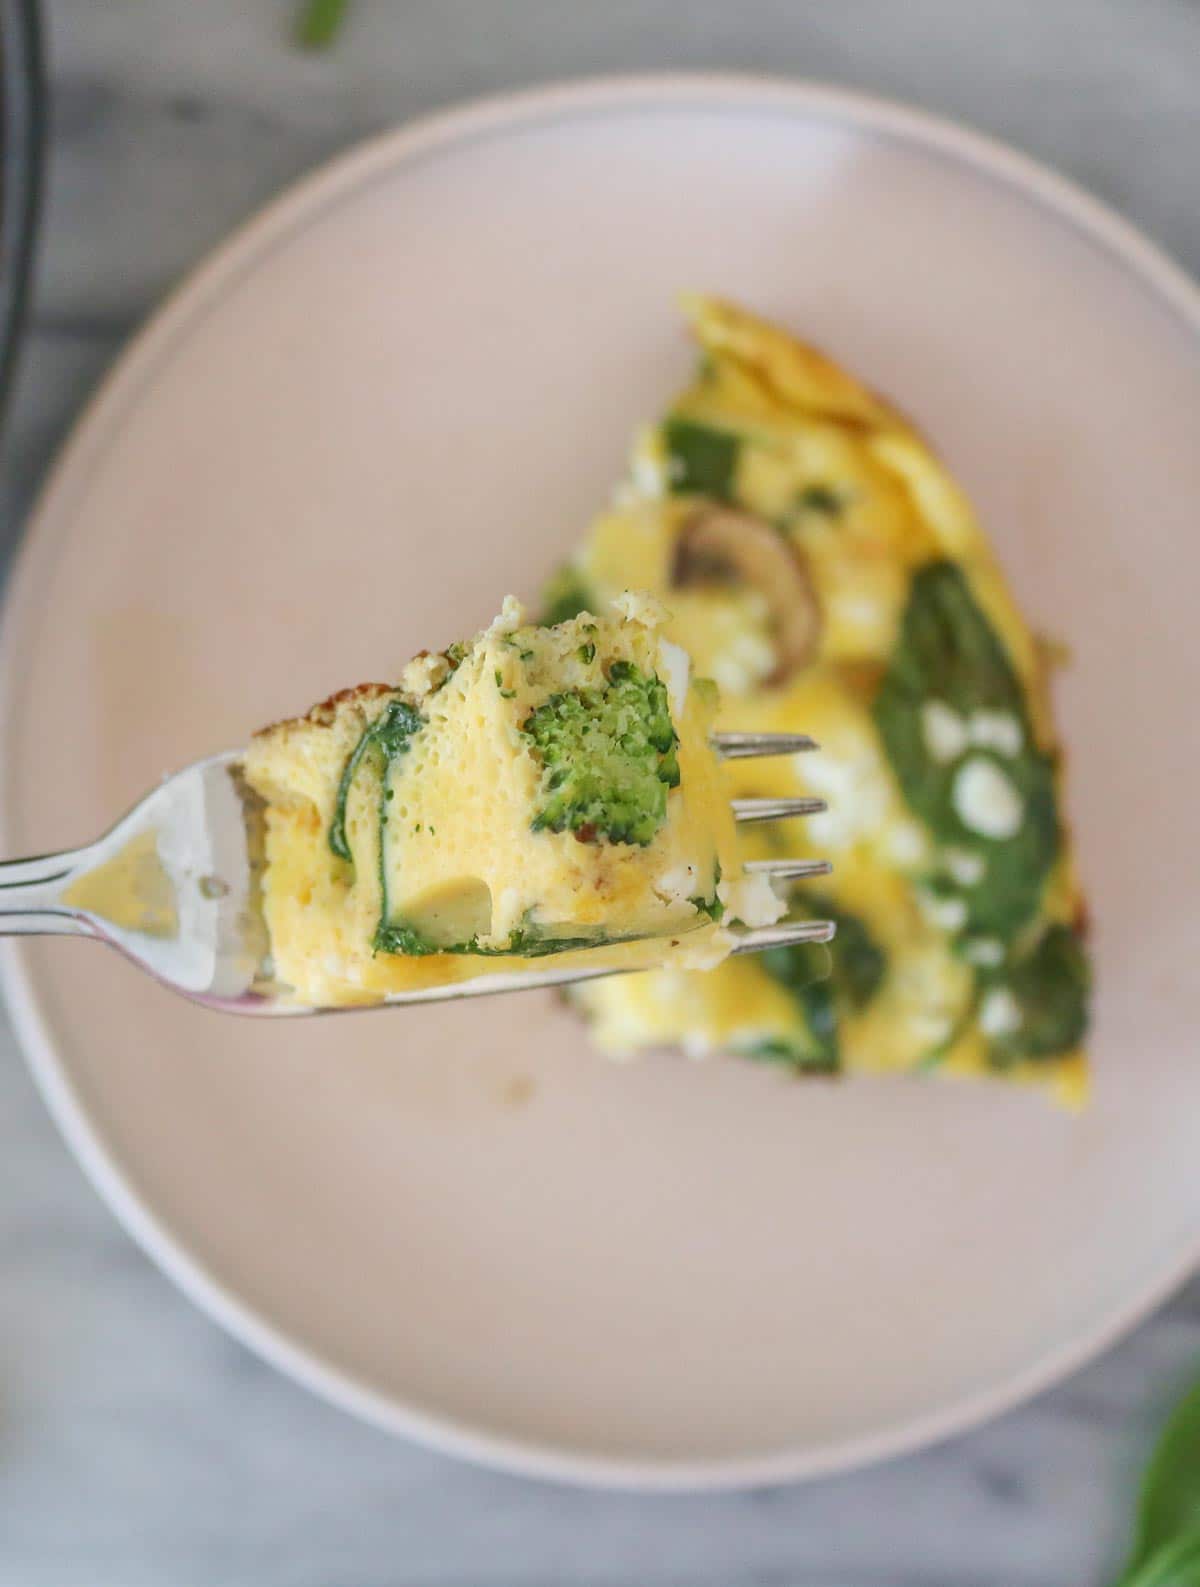 Forkful of frittata from a slice.